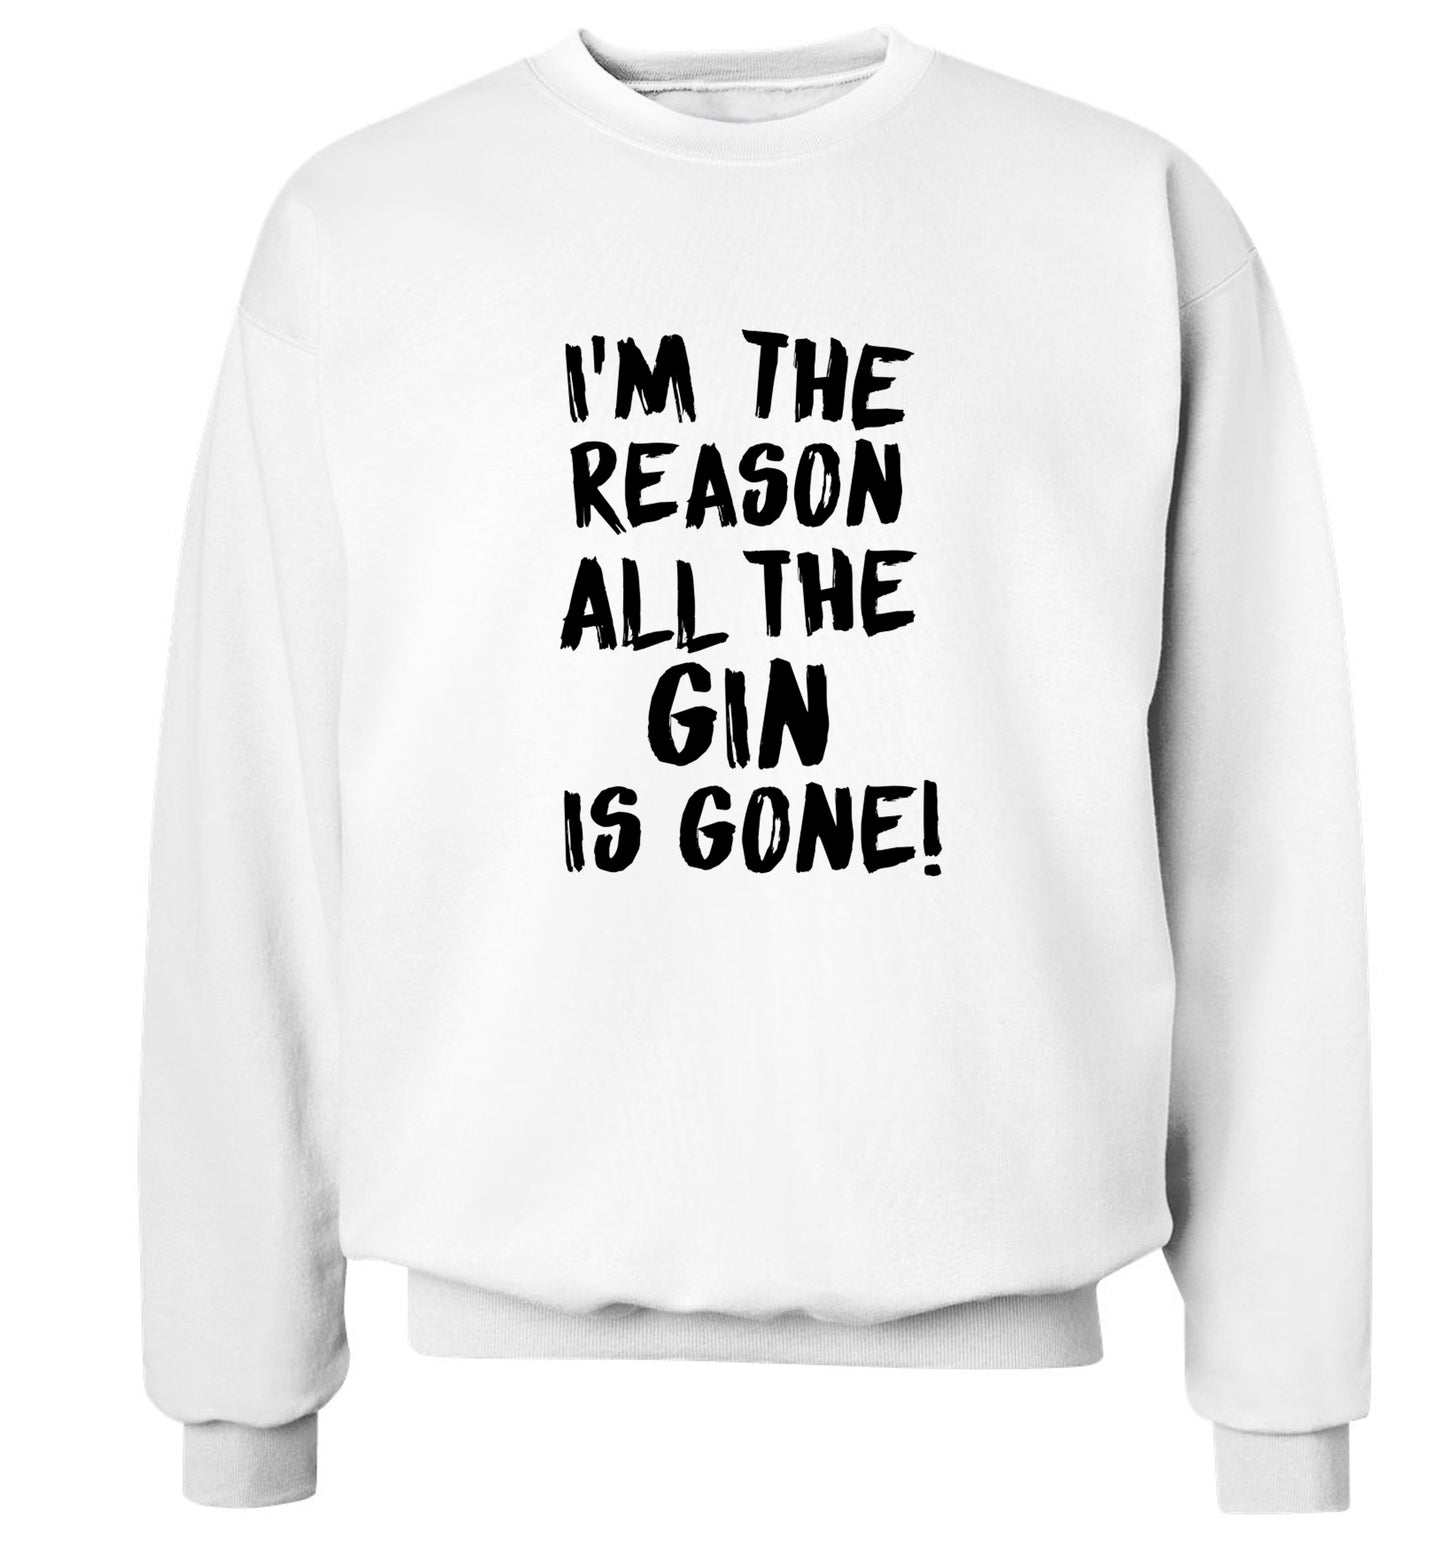 I'm the reason all the gin is gone Adult's unisex white Sweater 2XL